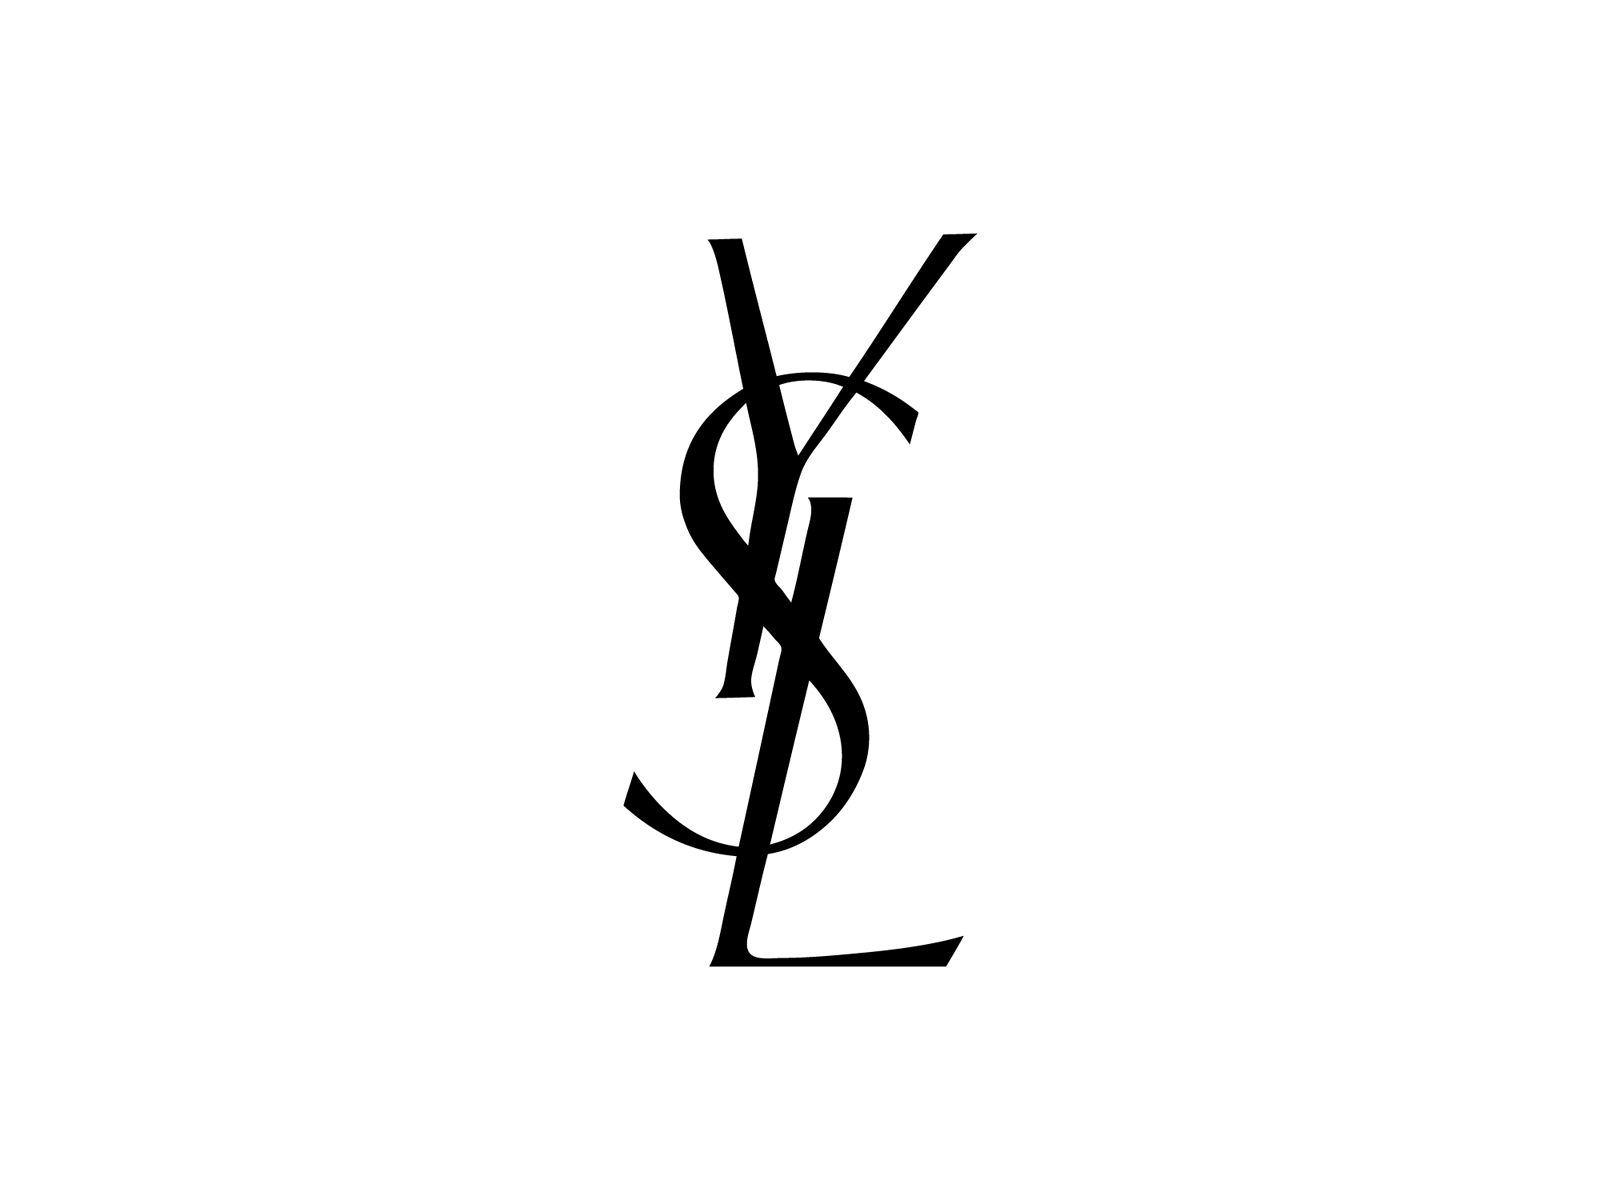 Top 99 ysl logo hd most viewed and downloaded